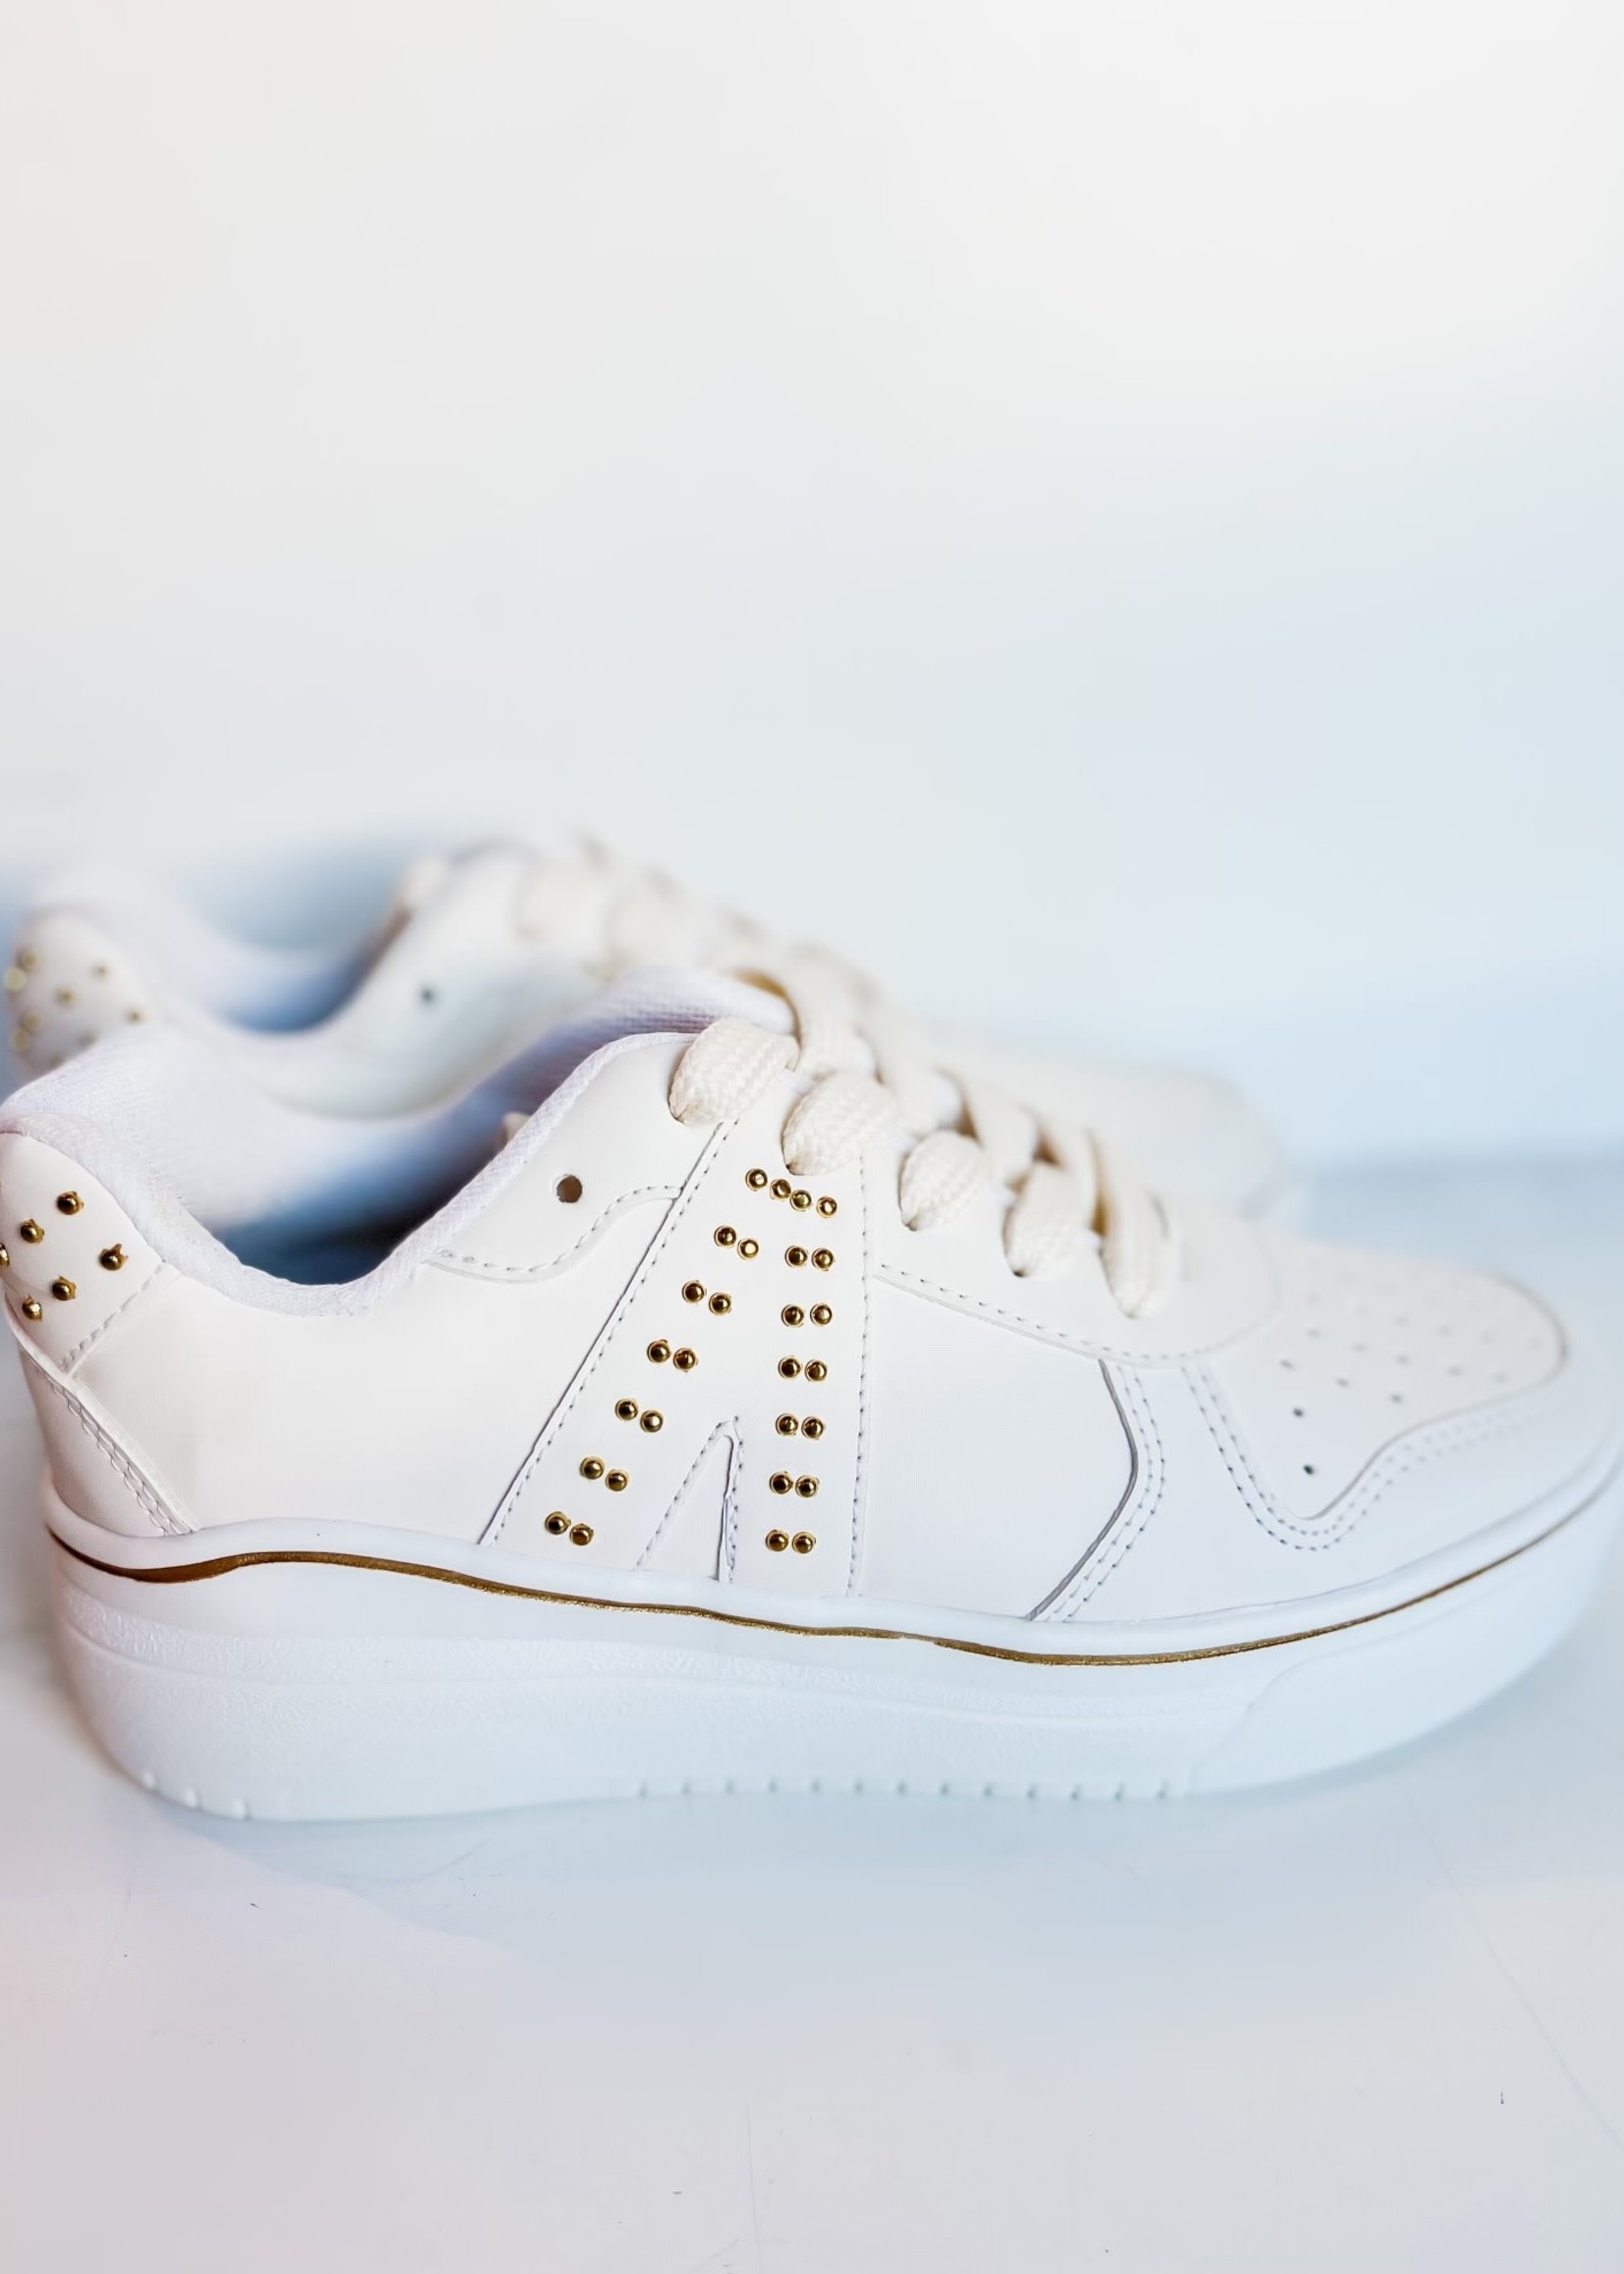 Bloom and Company Kris Cream Studded Sneakers